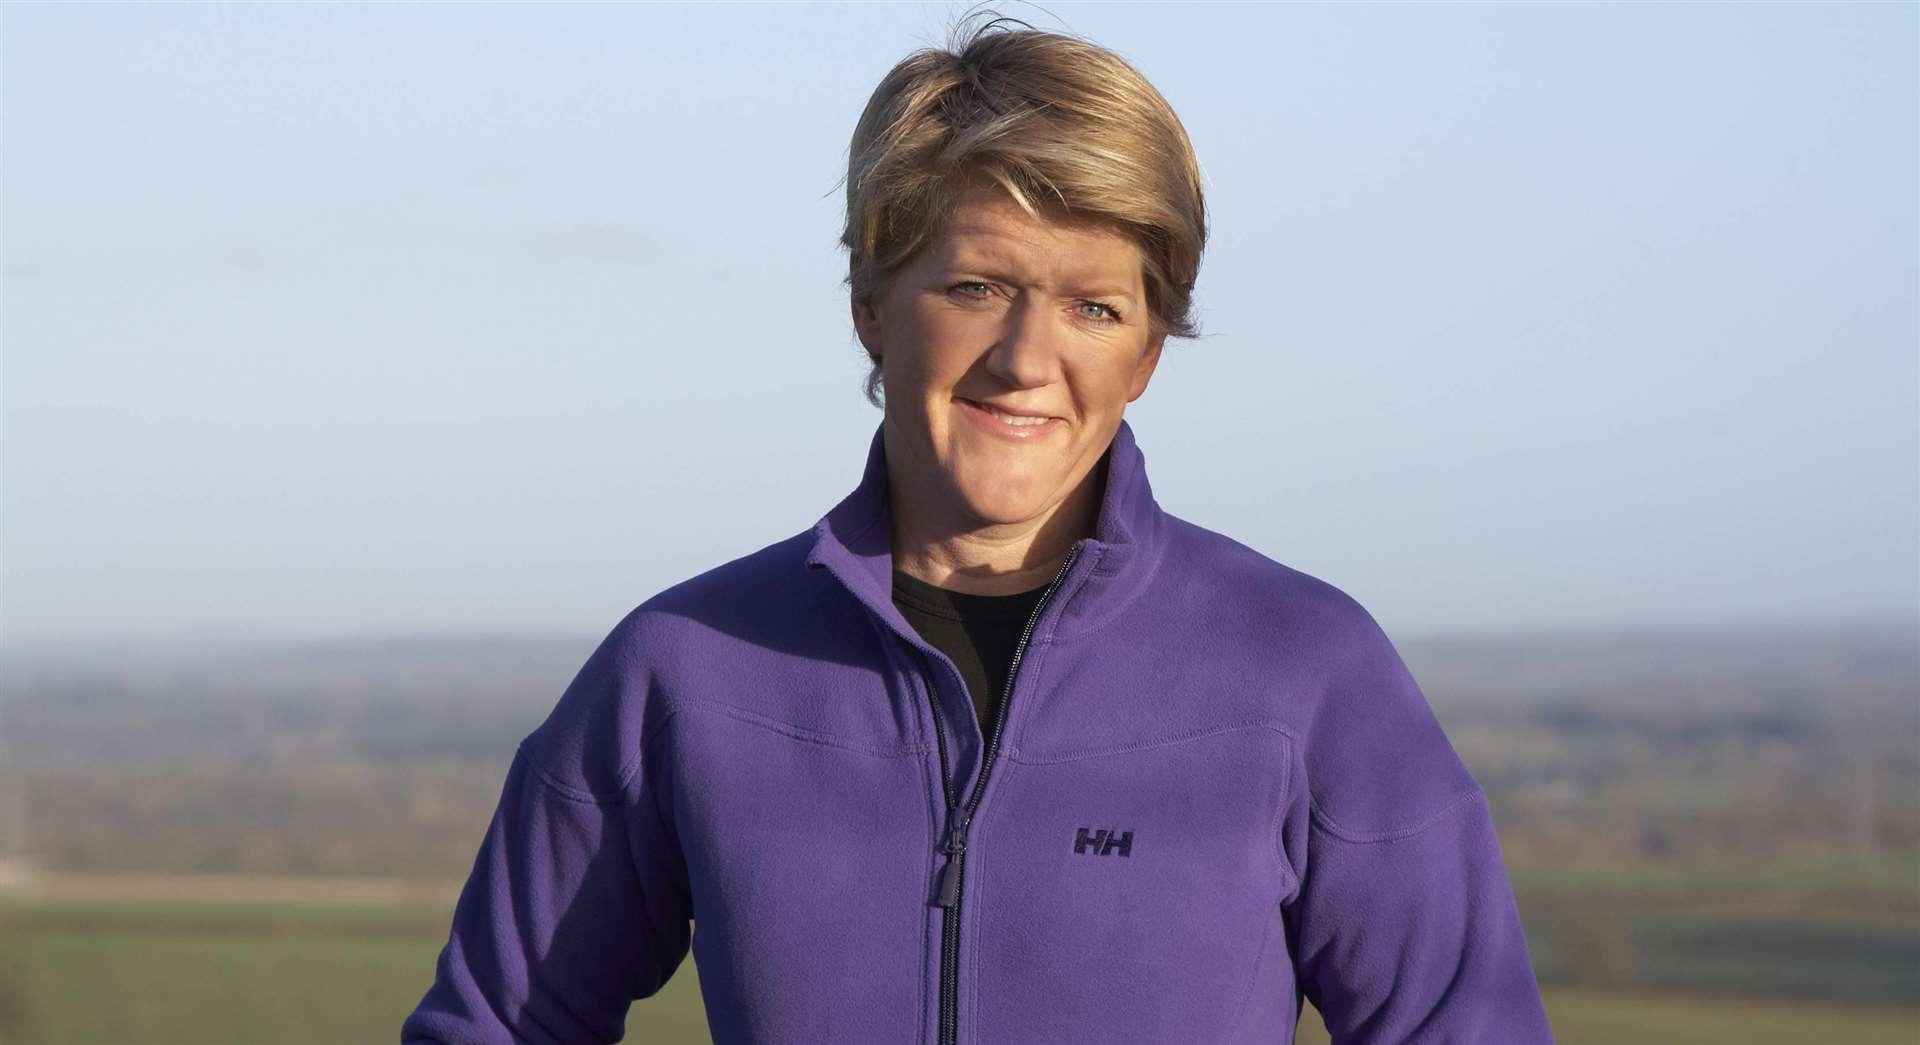 Clare Balding will judge the Leeds Castle 900 writing competition.